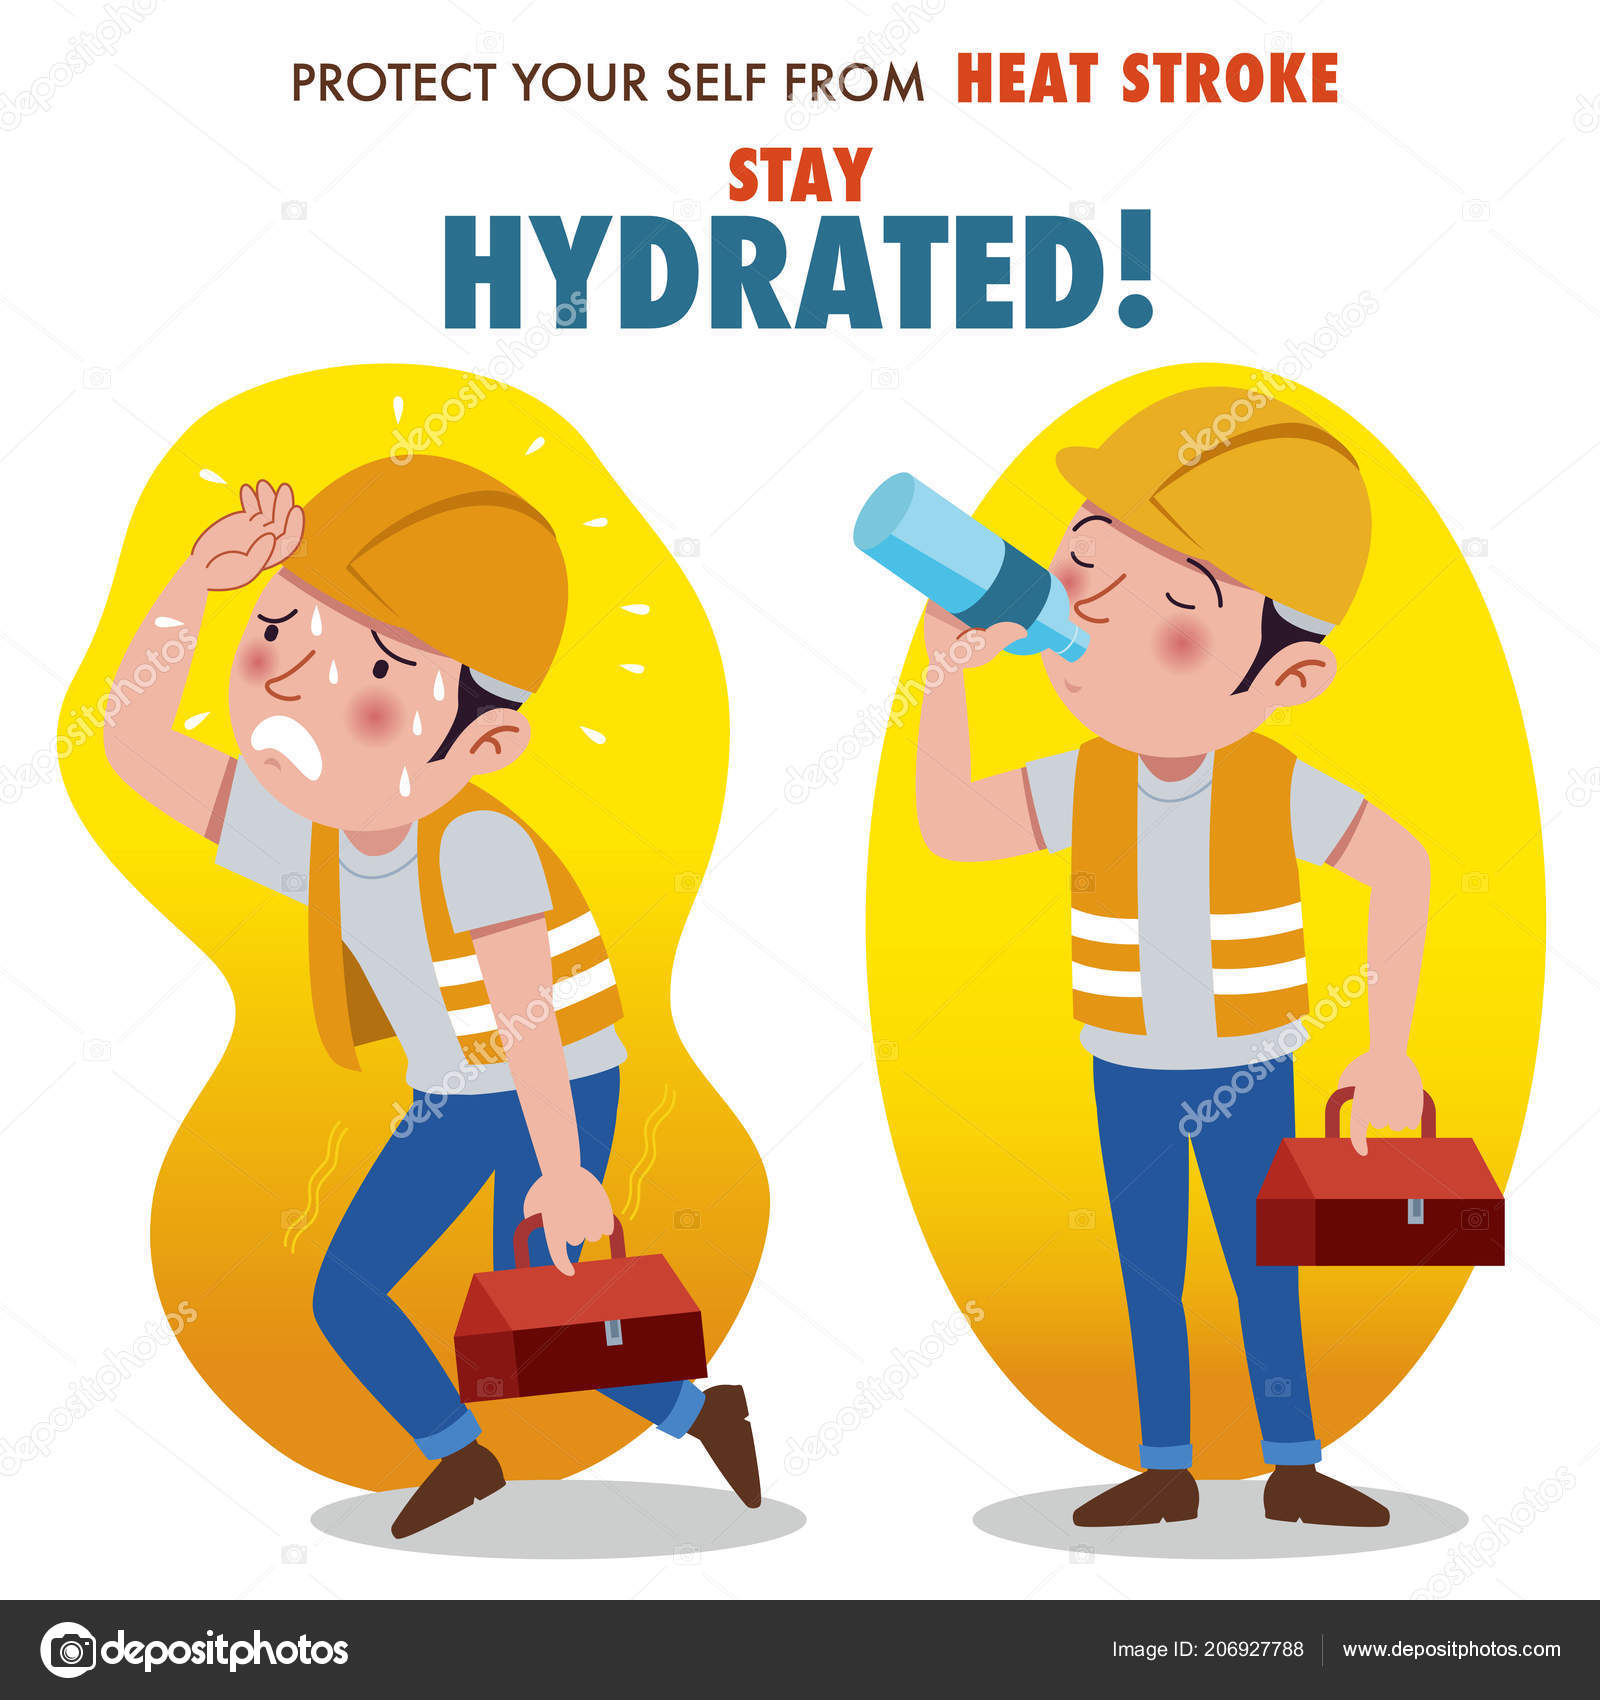 Protect Yourself Heat Stroke Stay Hydrated Illustration Construction